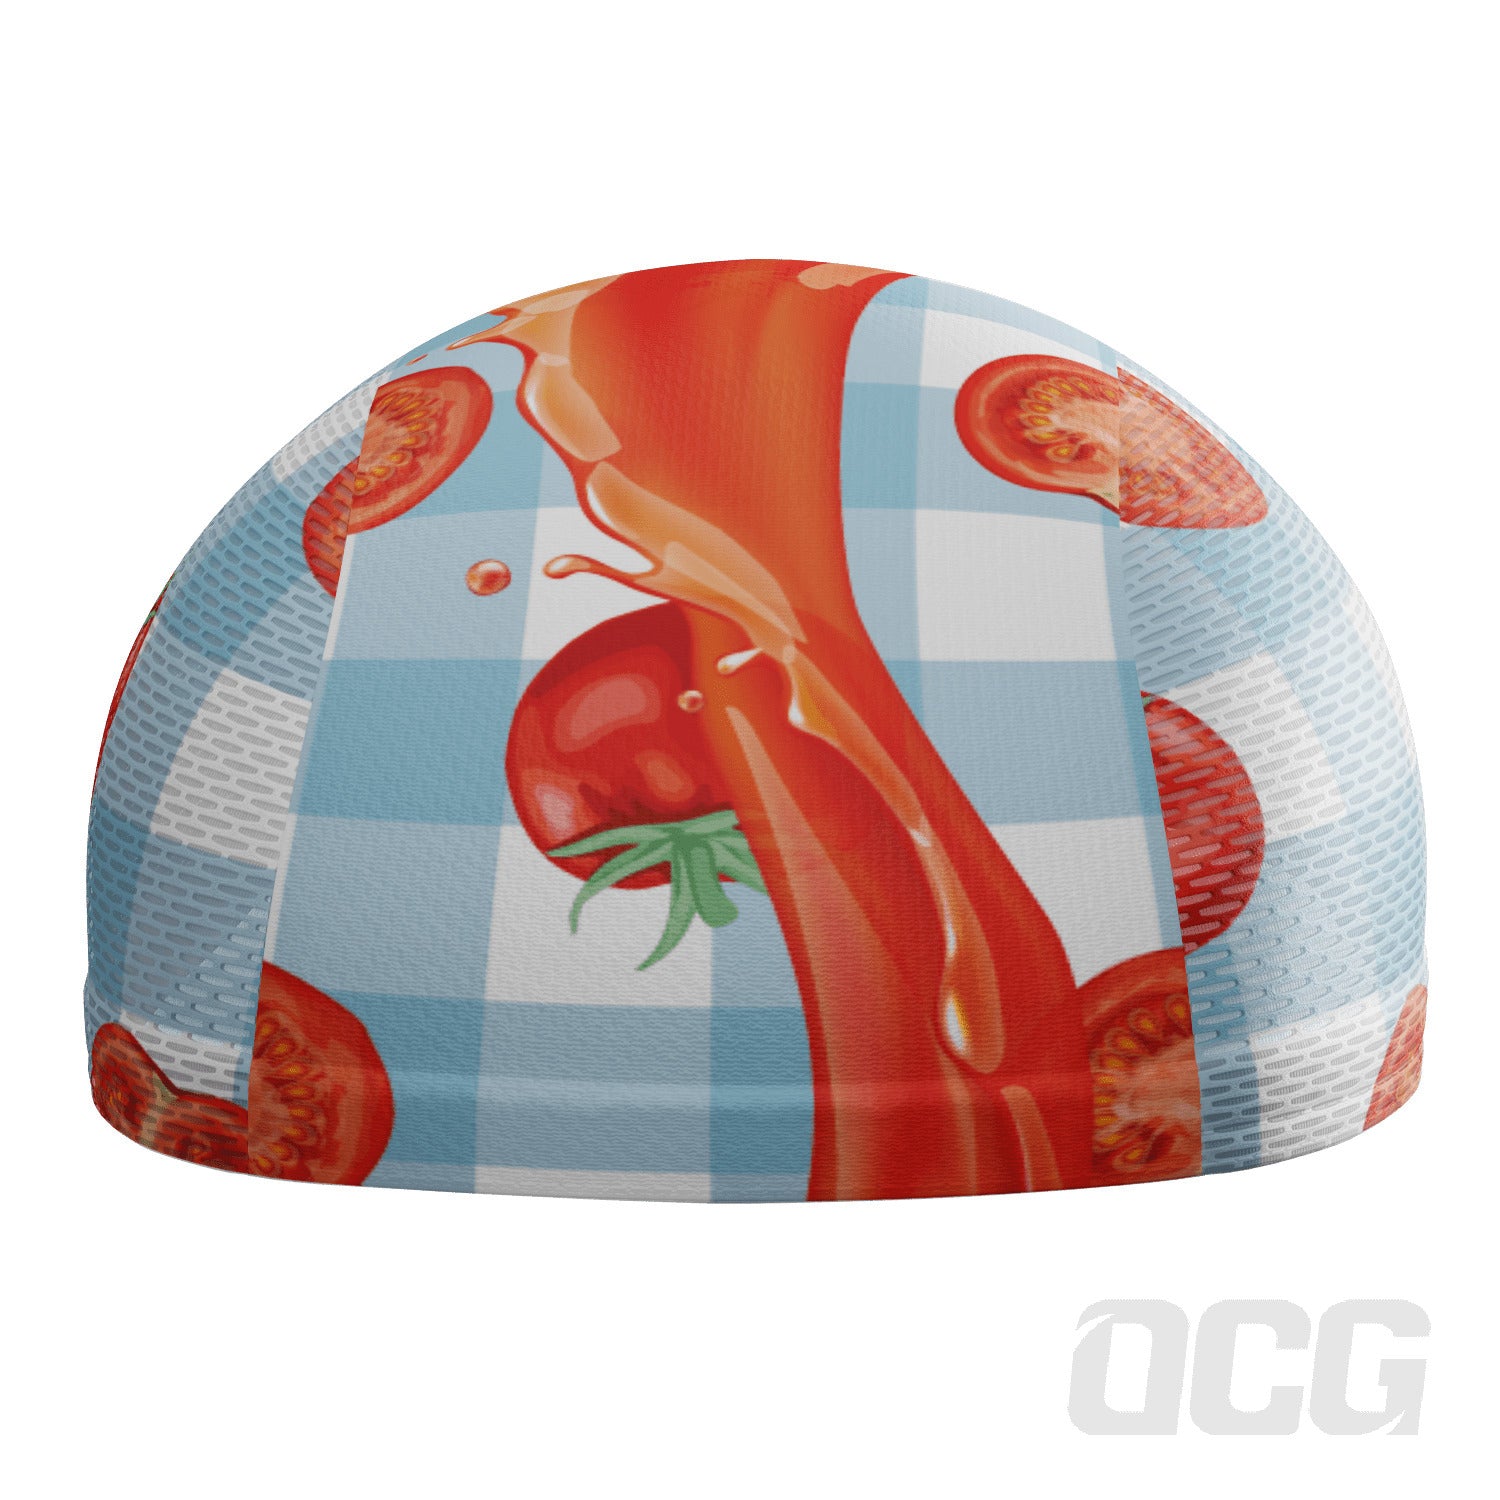 Unisex Tomato Sauce Table Cloth Quick Dry Cycling Cap